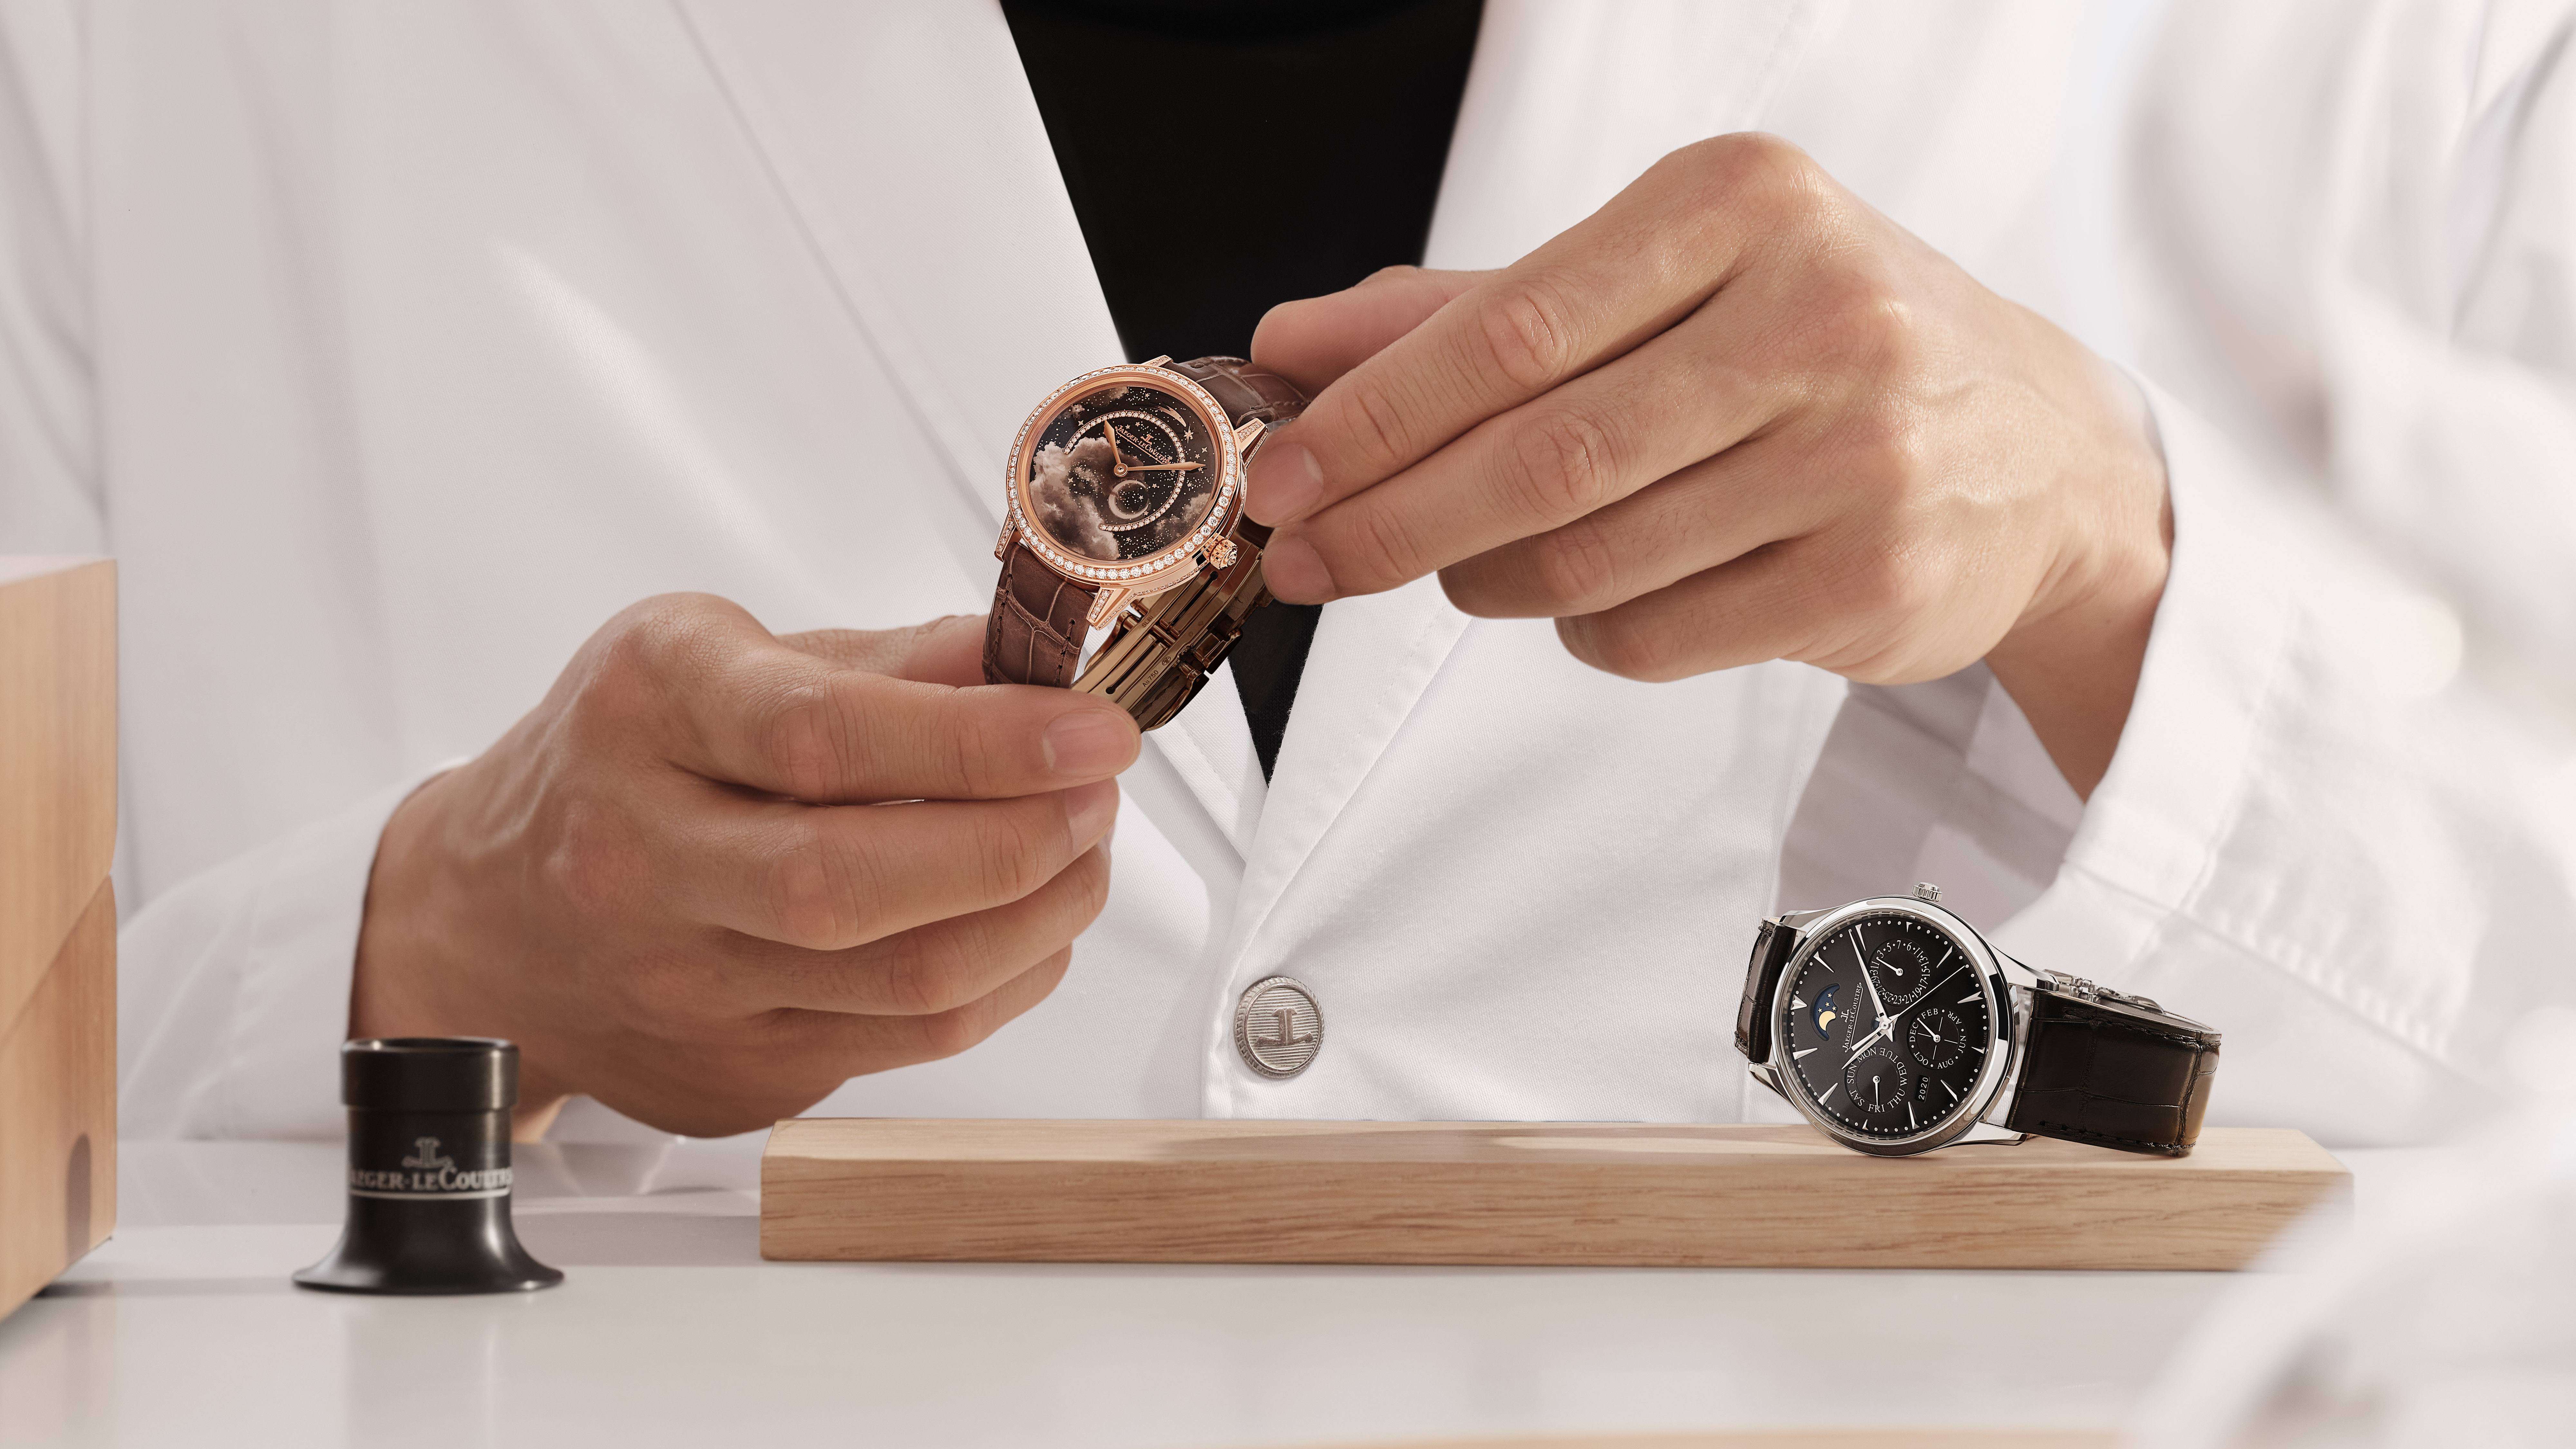 DISCOVER MANUFACTURE WATCHES